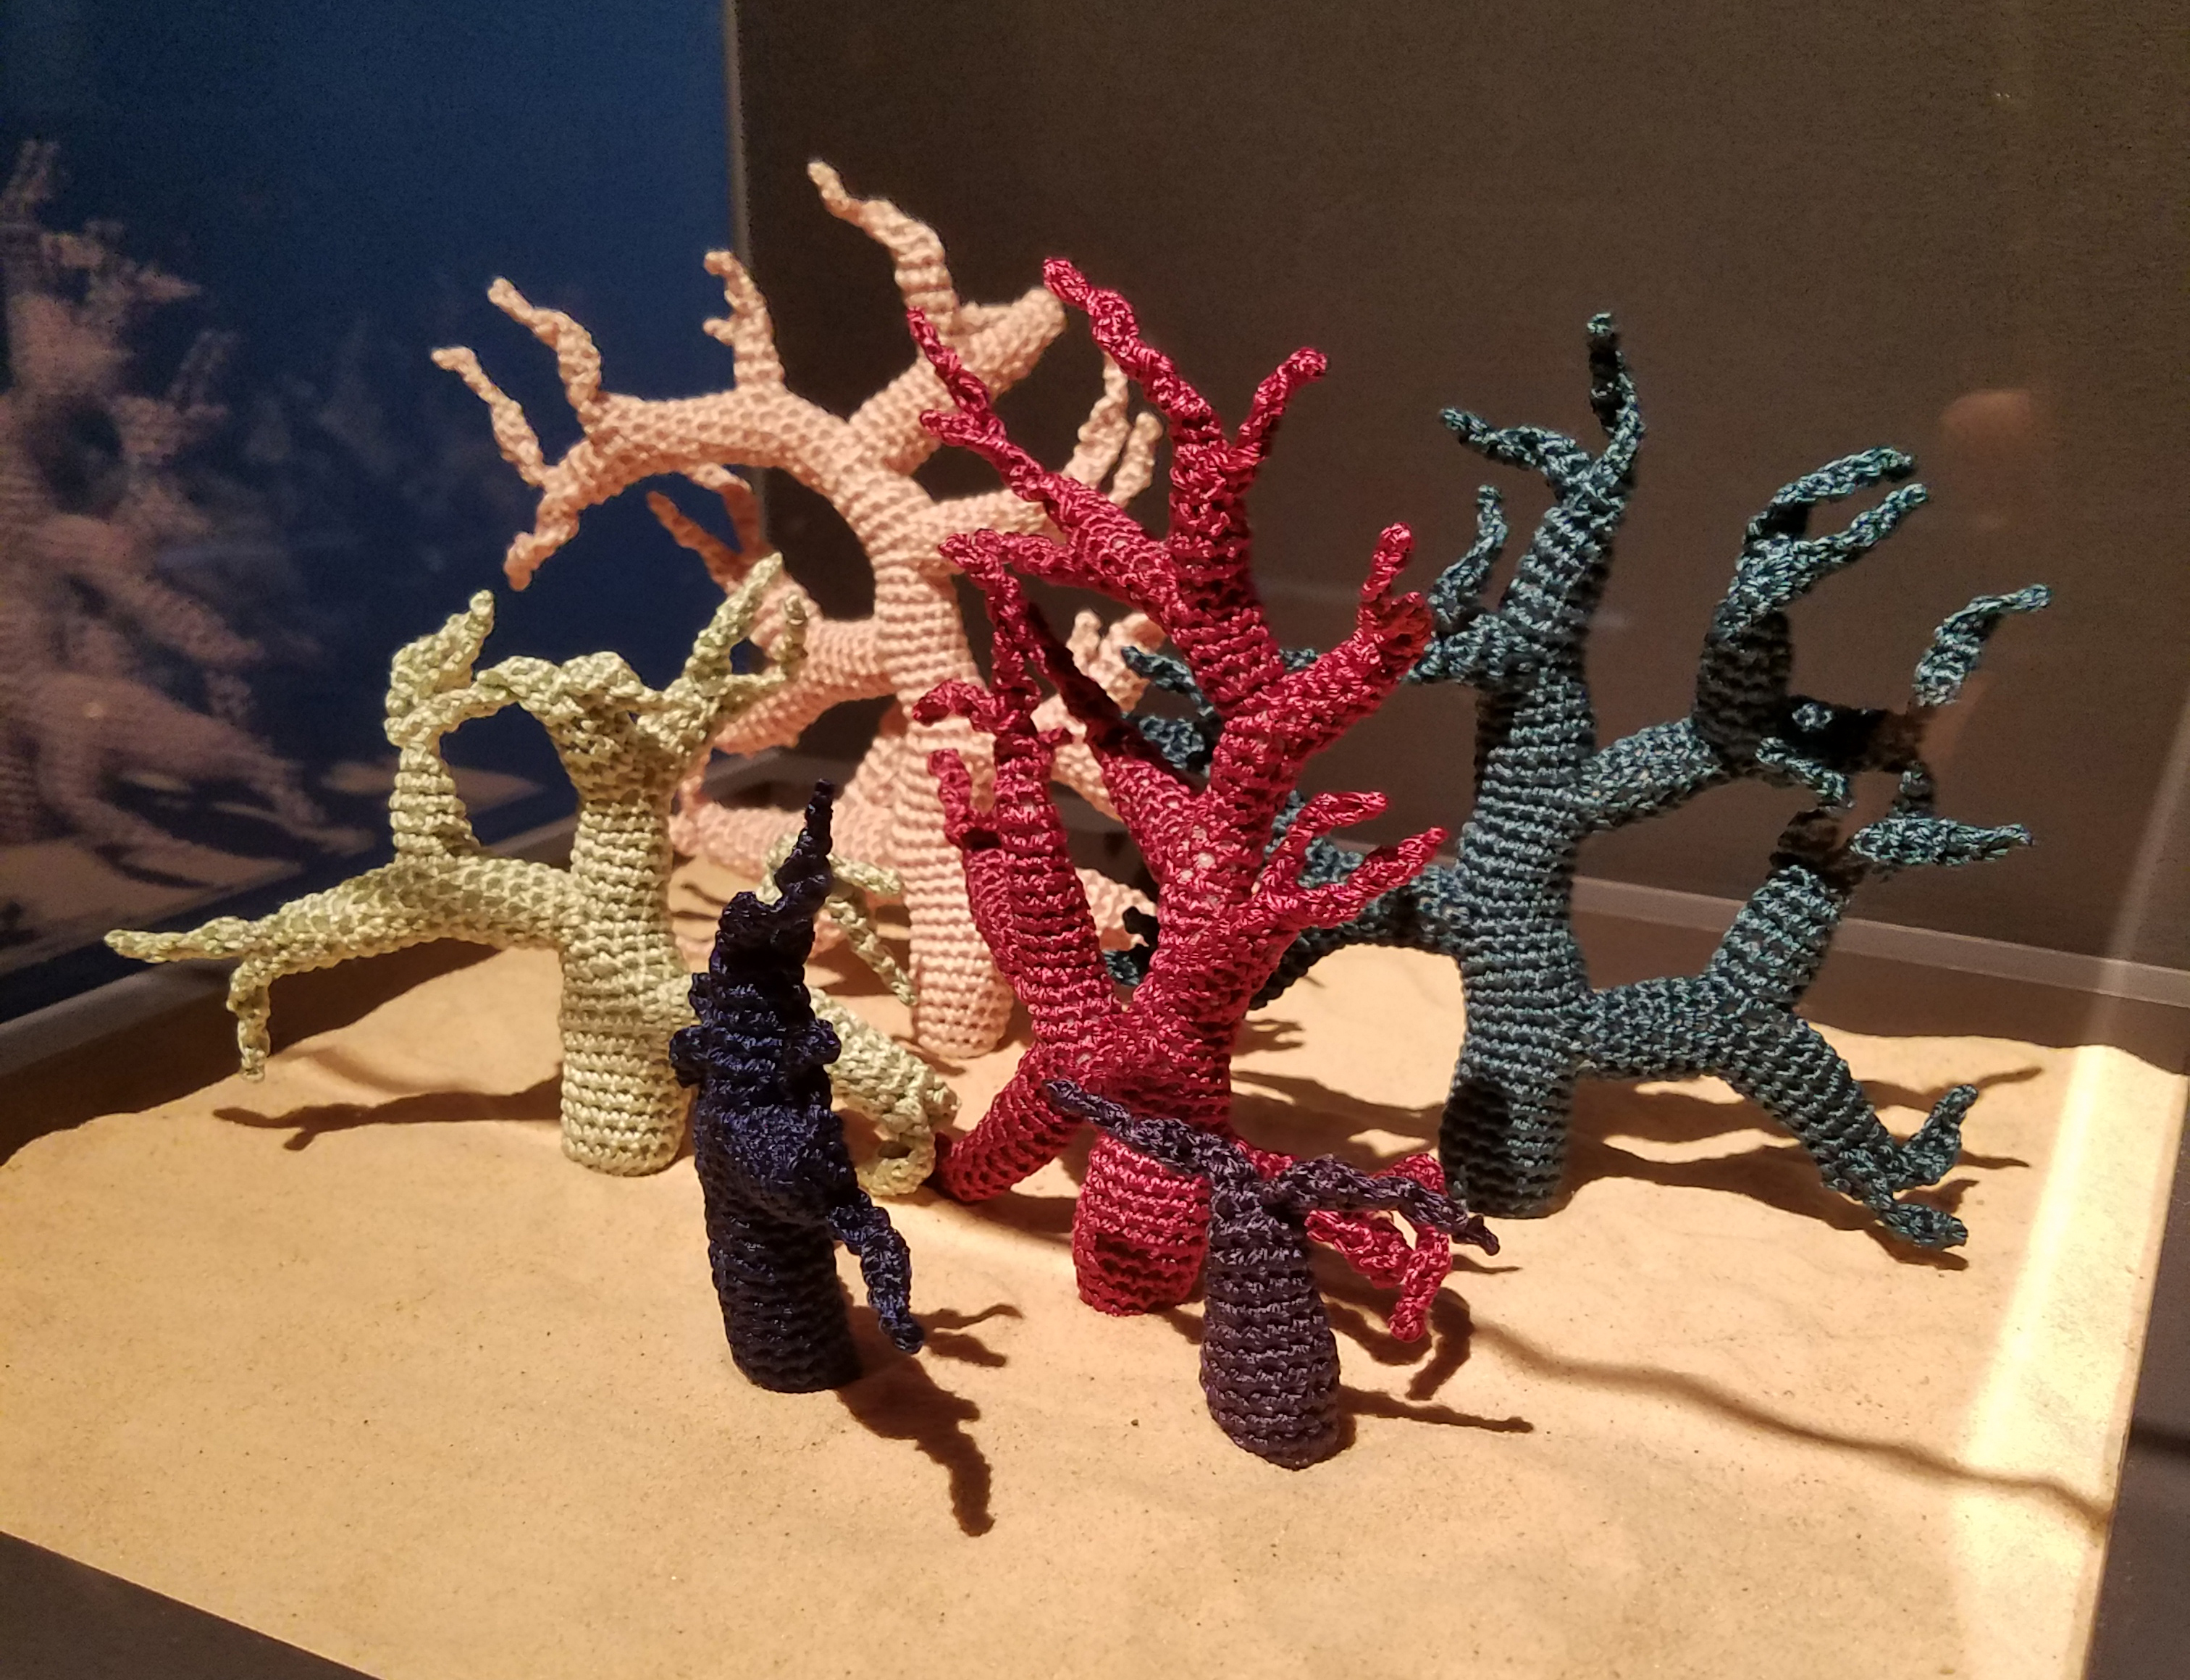 'Crochet Coral Reef: TOXIC SEAS' at the Museum of Arts and Design (MAD) in New York City